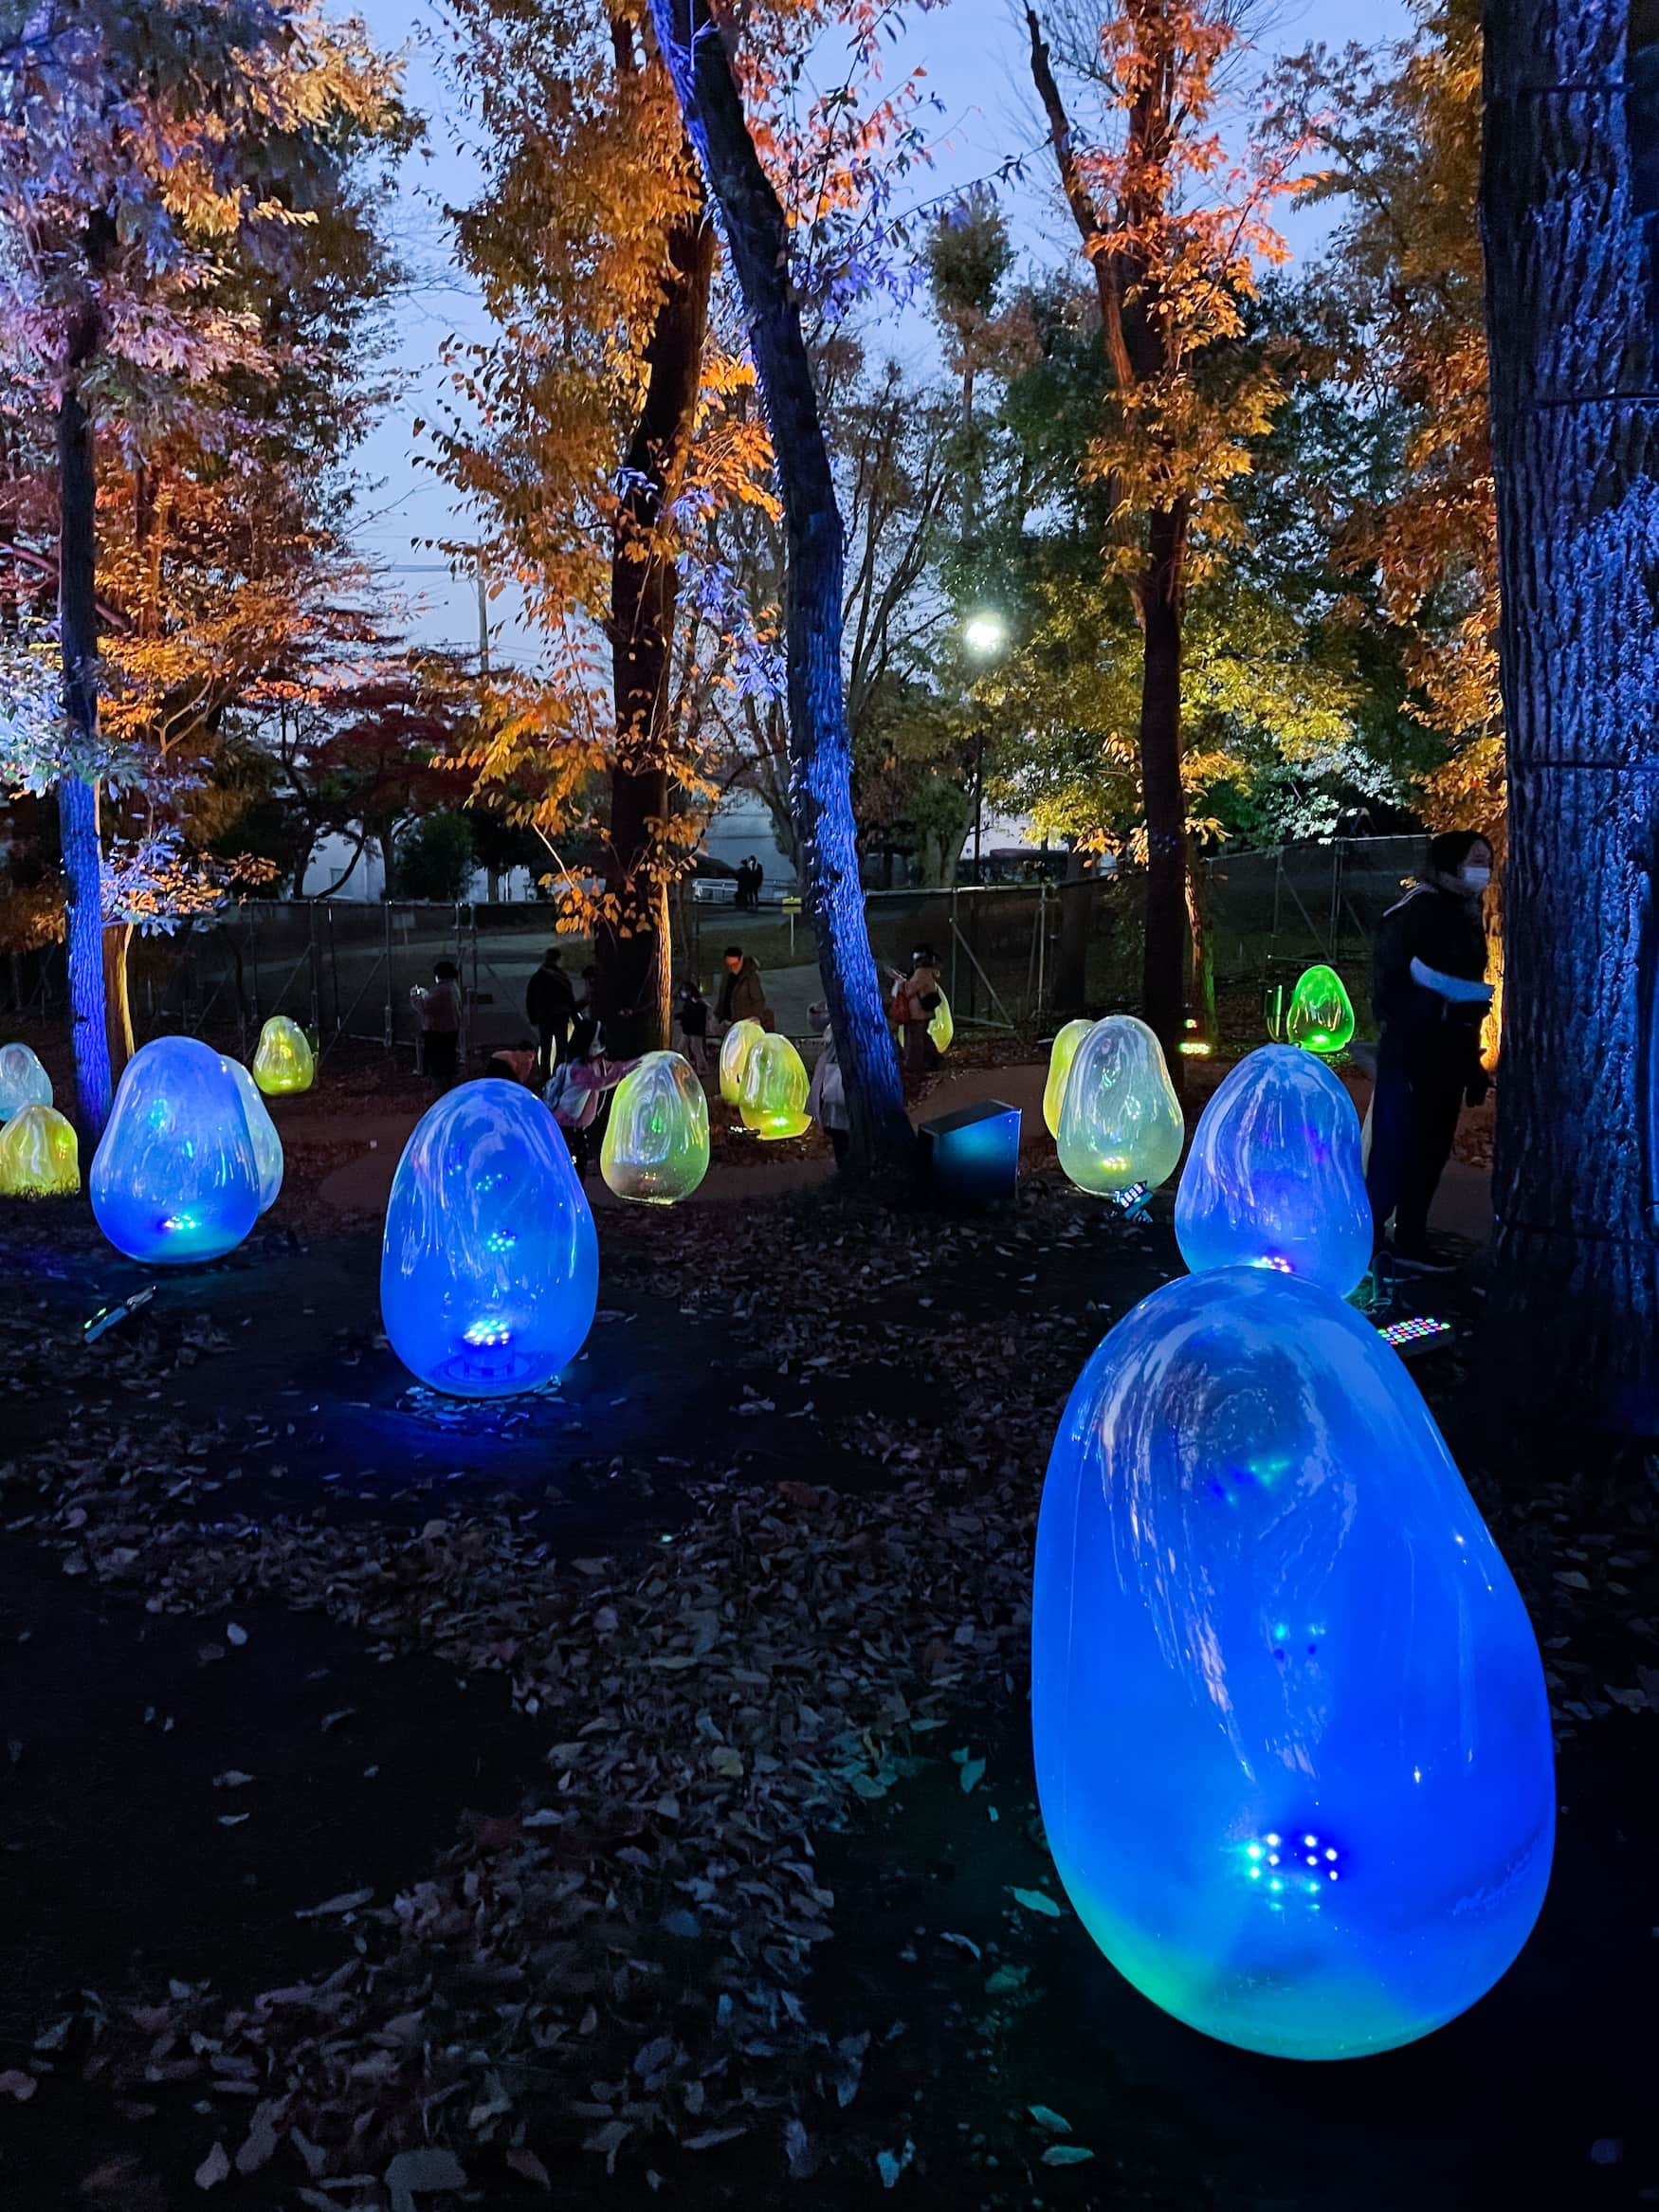 Colorful art installations by the teamLab collective of artists in Higashi Tokorozawa park